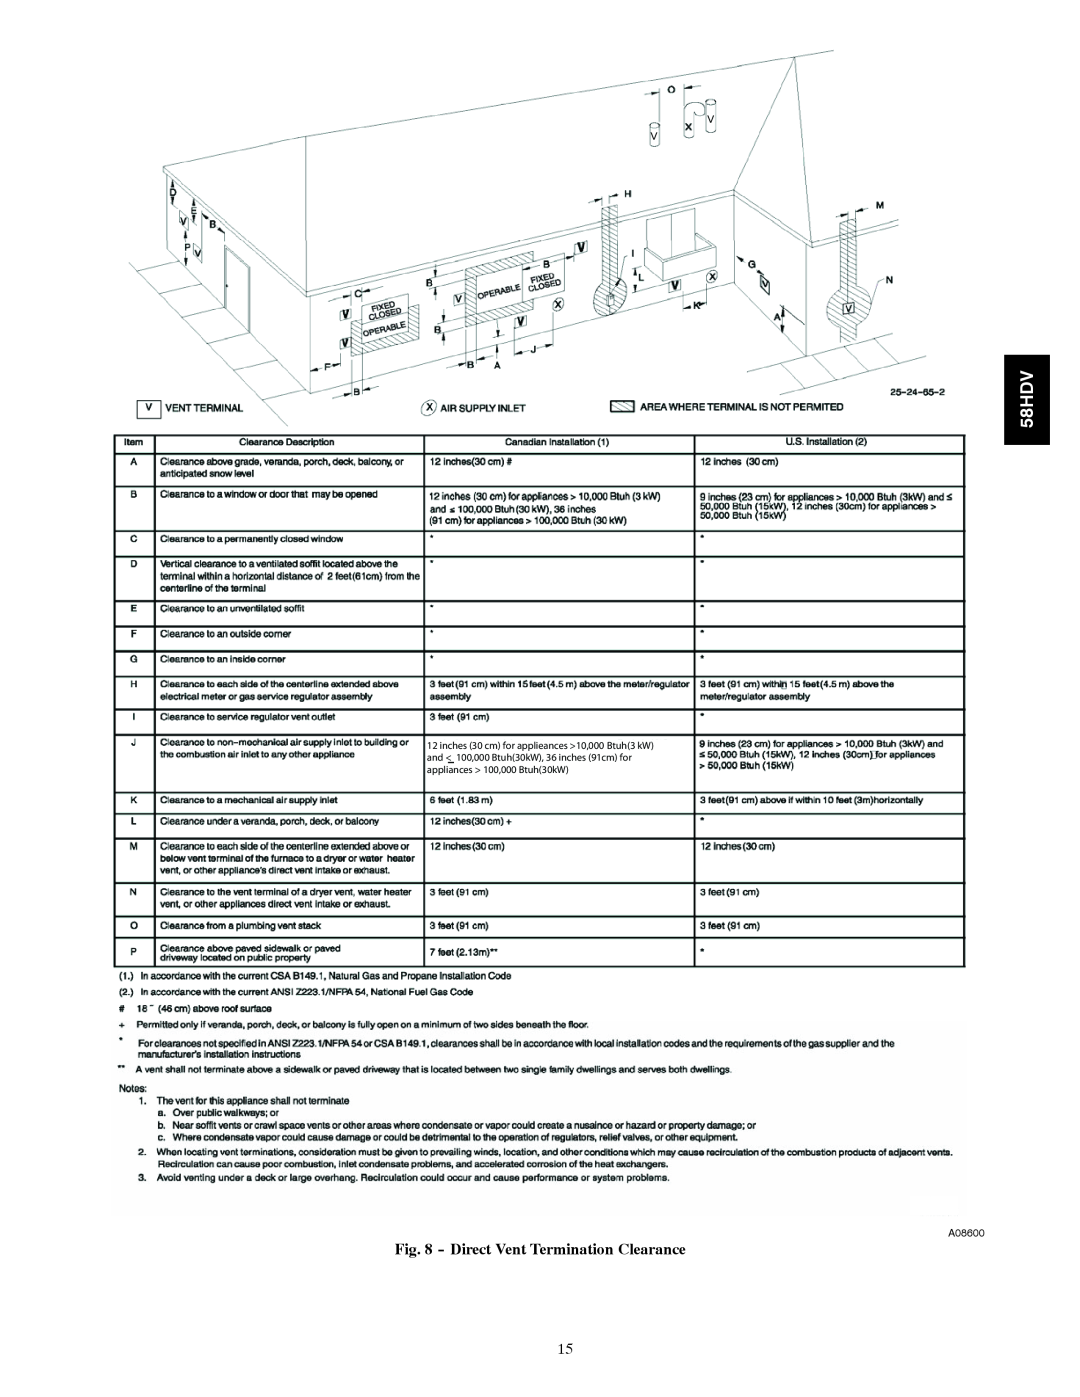 Carrier 58HDV installation instructions Direct Vent Termination Clearance, A08600 